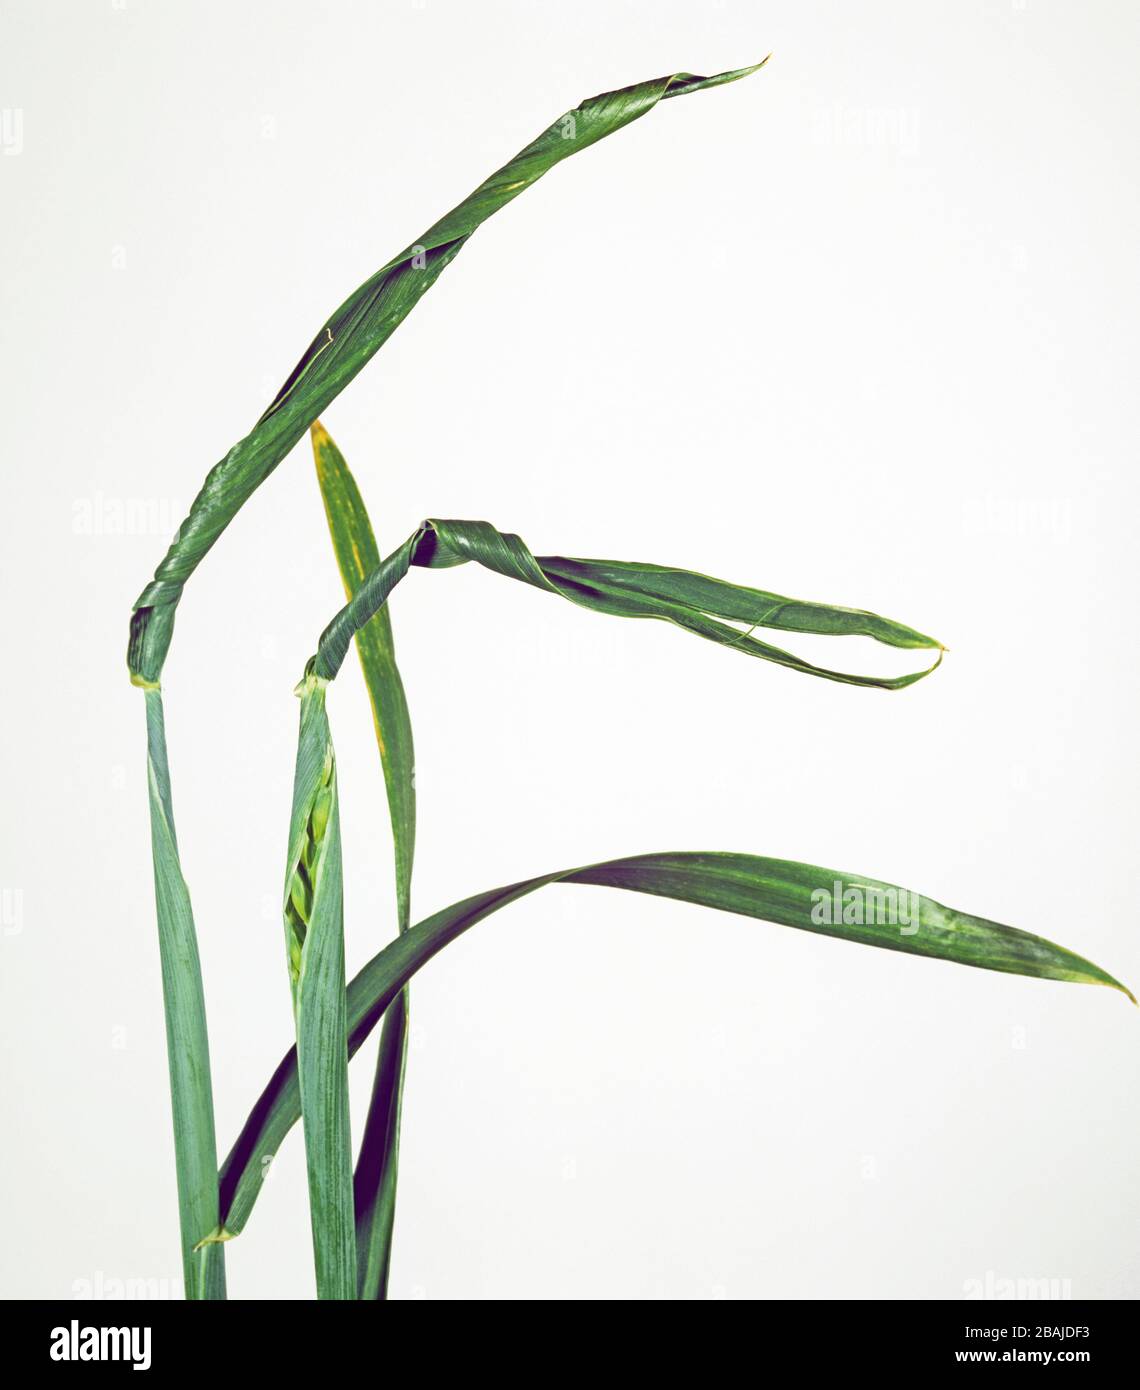 A wheat ear showing copper deficiency symptoms with ear trapped by twisted flagleaf Stock Photo